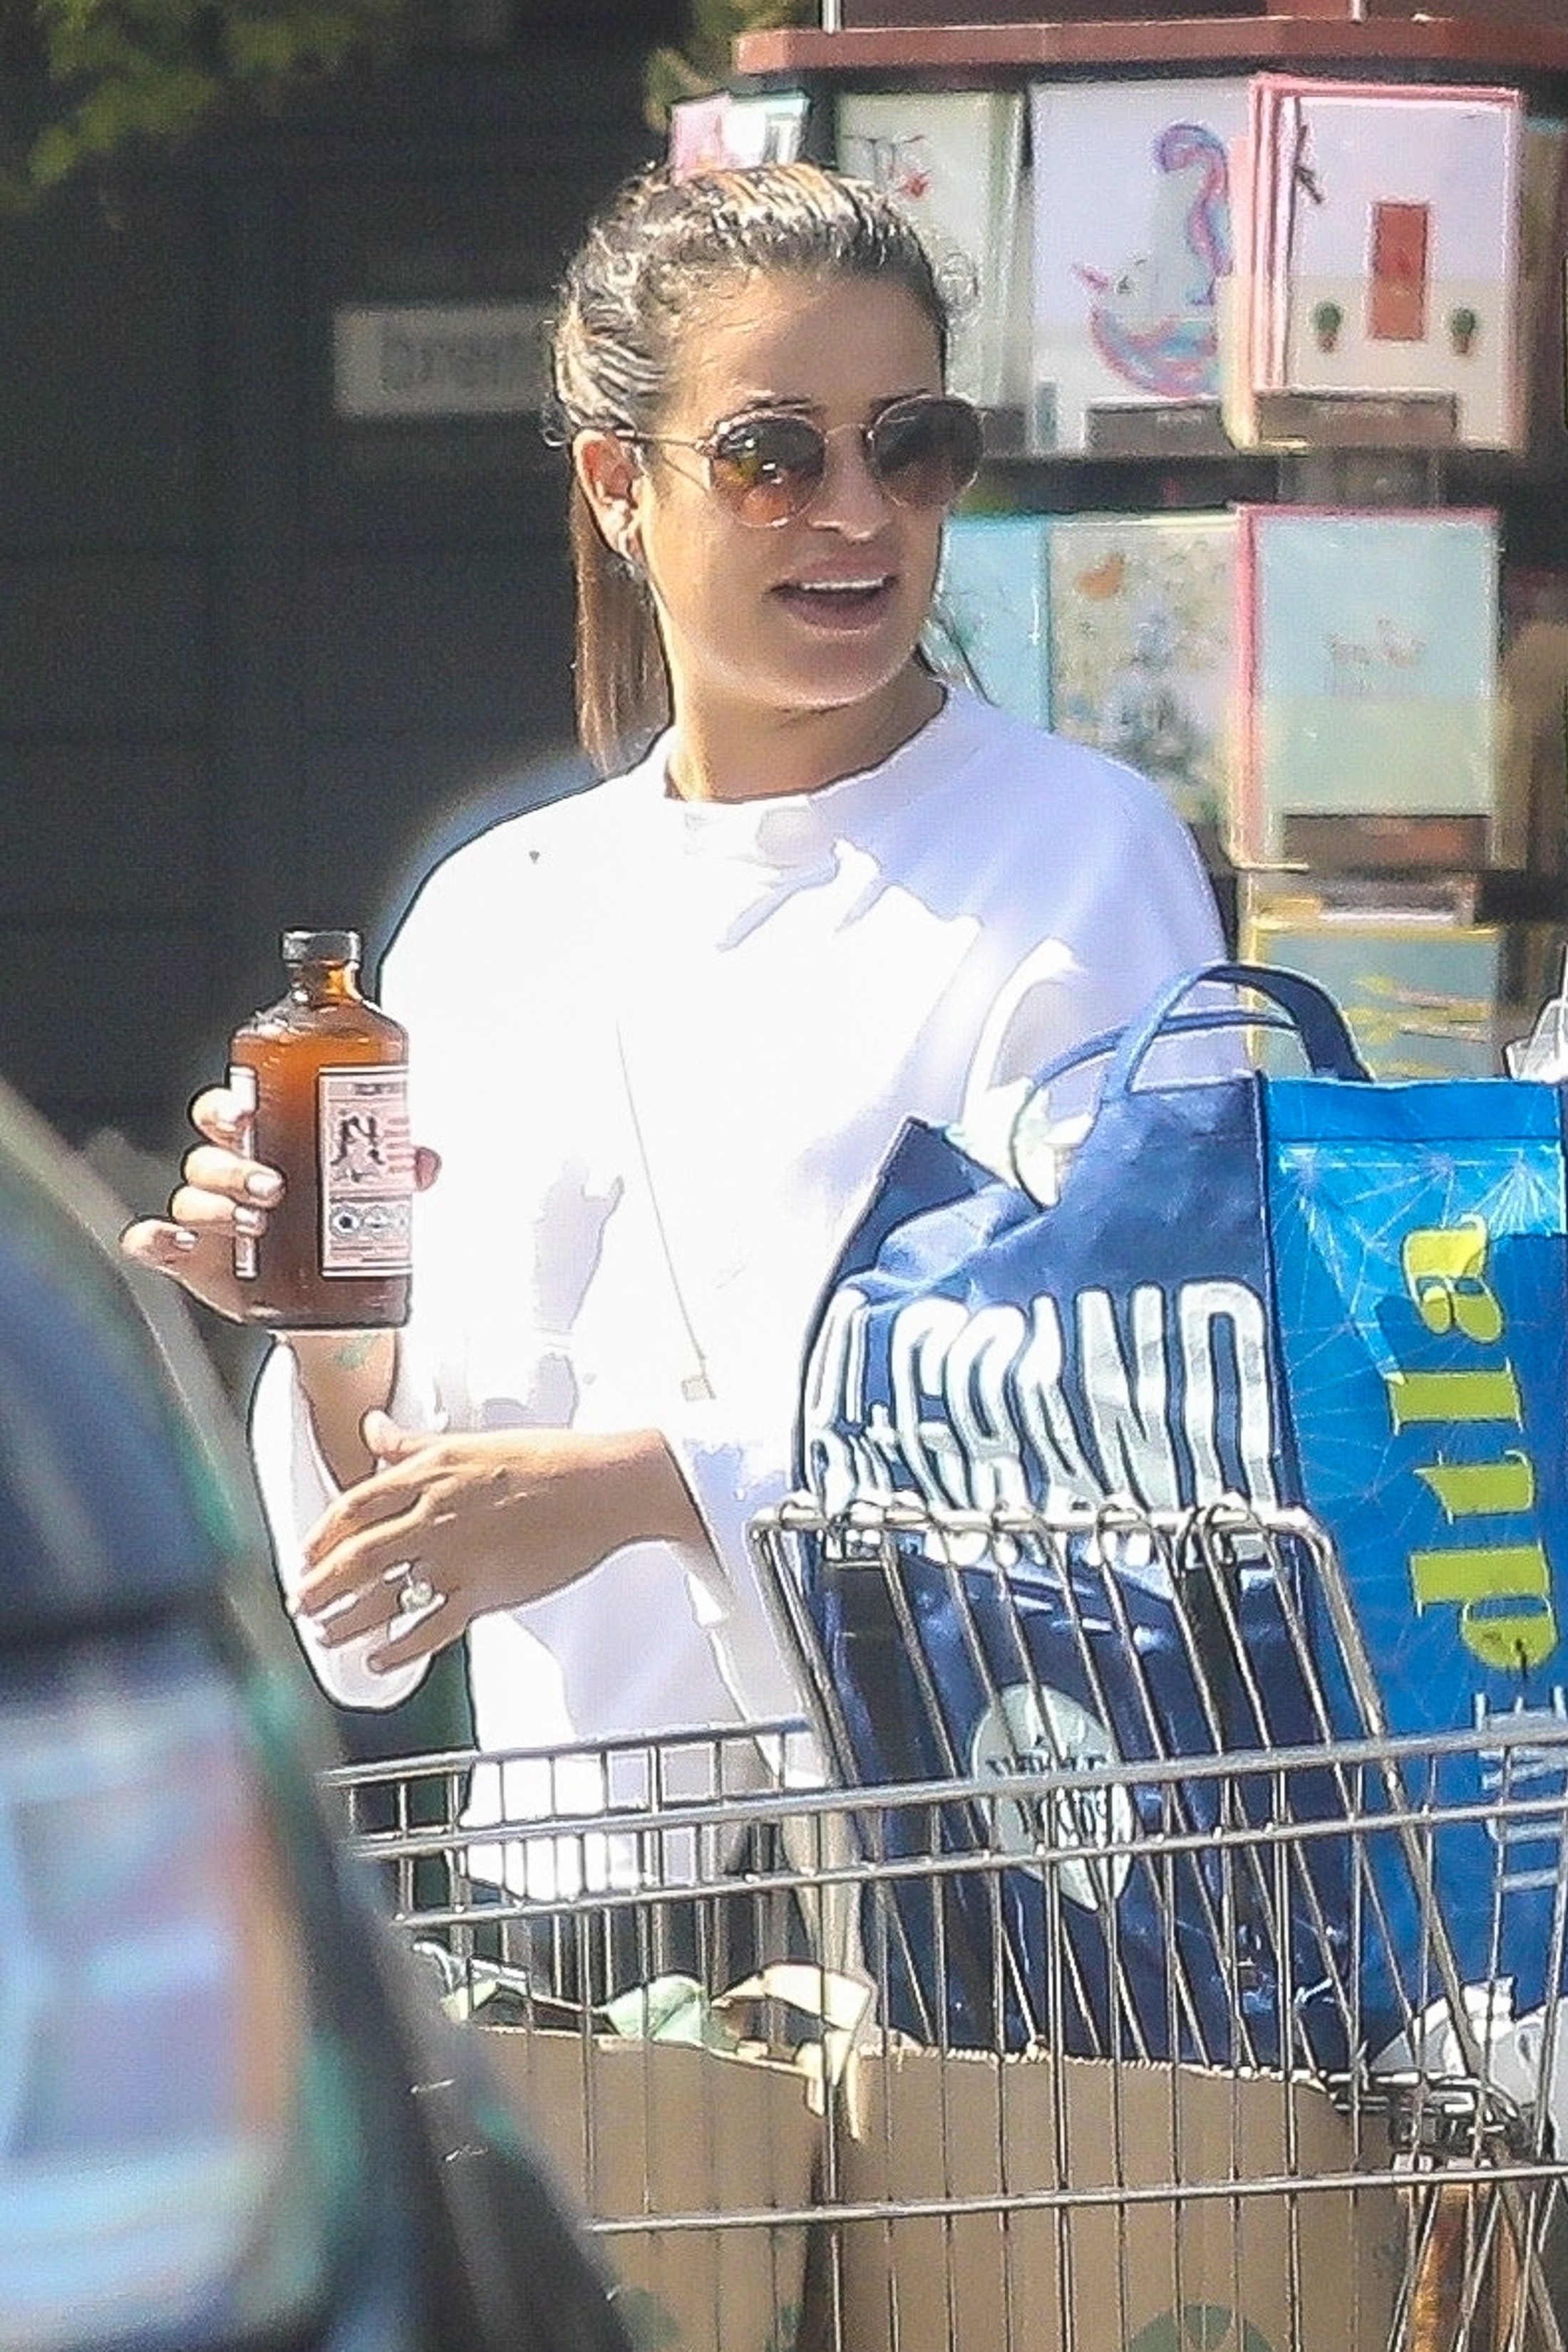 lea-michele-at-whole-foods-with-z-10072018.jpg